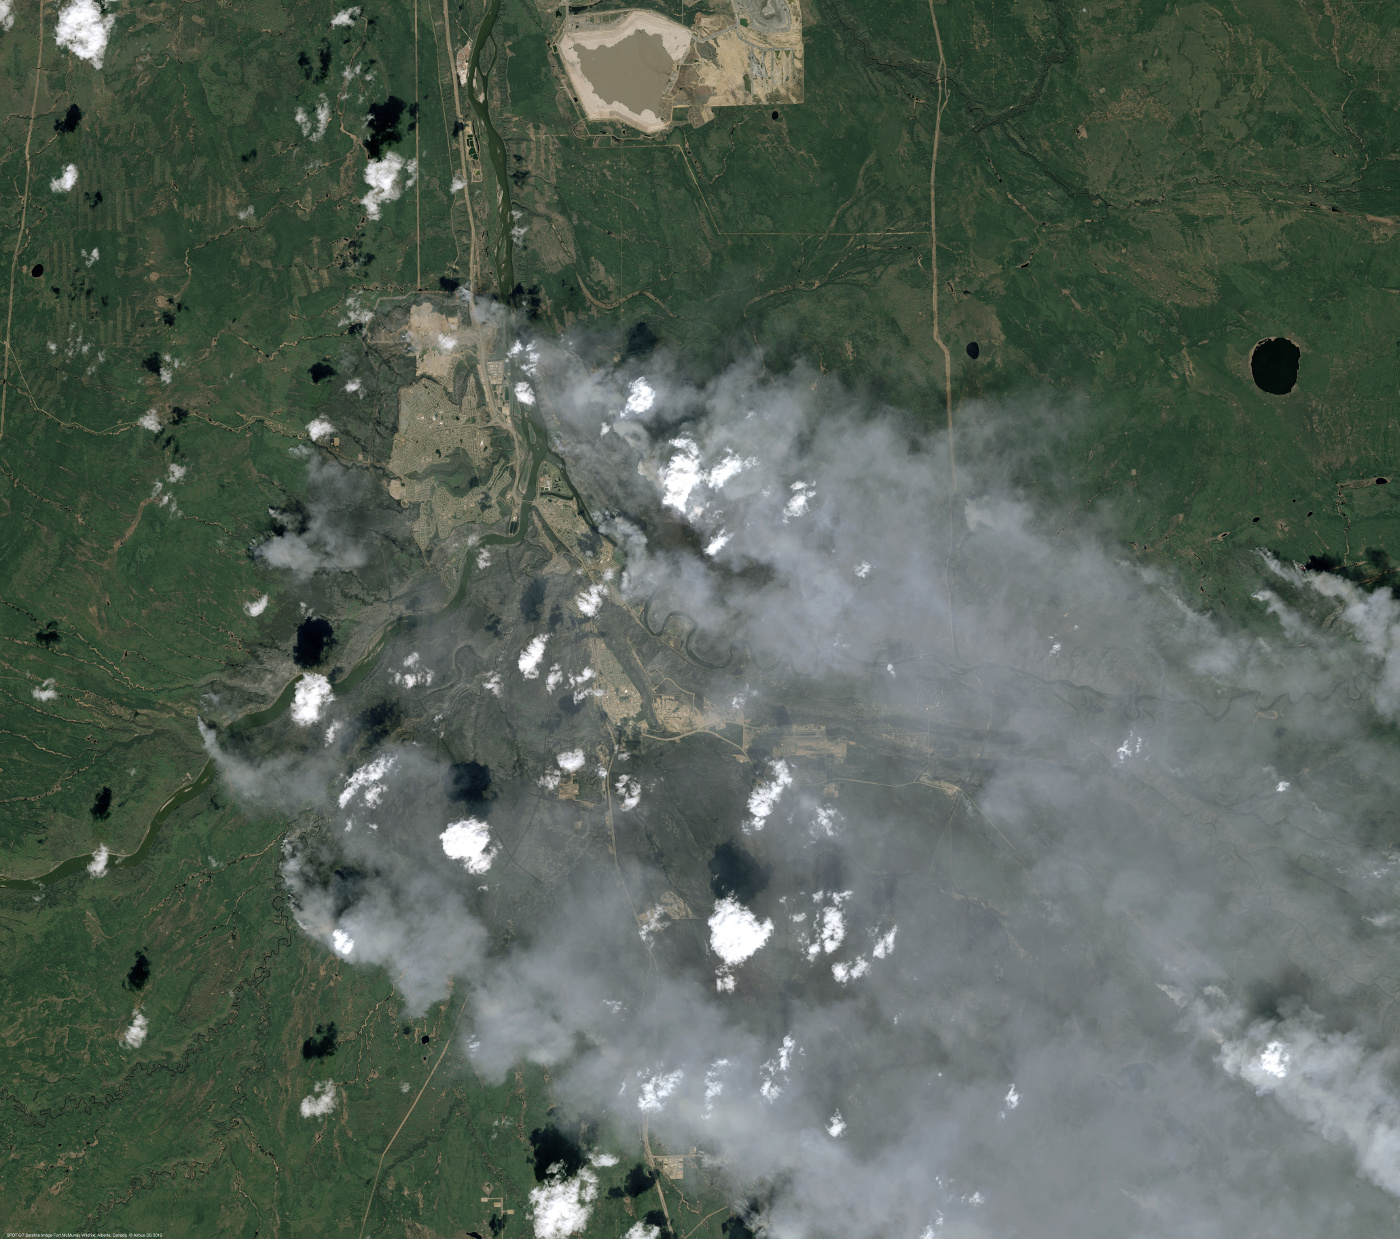 Fort Mc Murray - Alberta - Canada - Wild fires - Incendies - Feux - 6 mai 2016 - Satellite - SPOT 7 - Earth Observation - Airbus Defence and Space